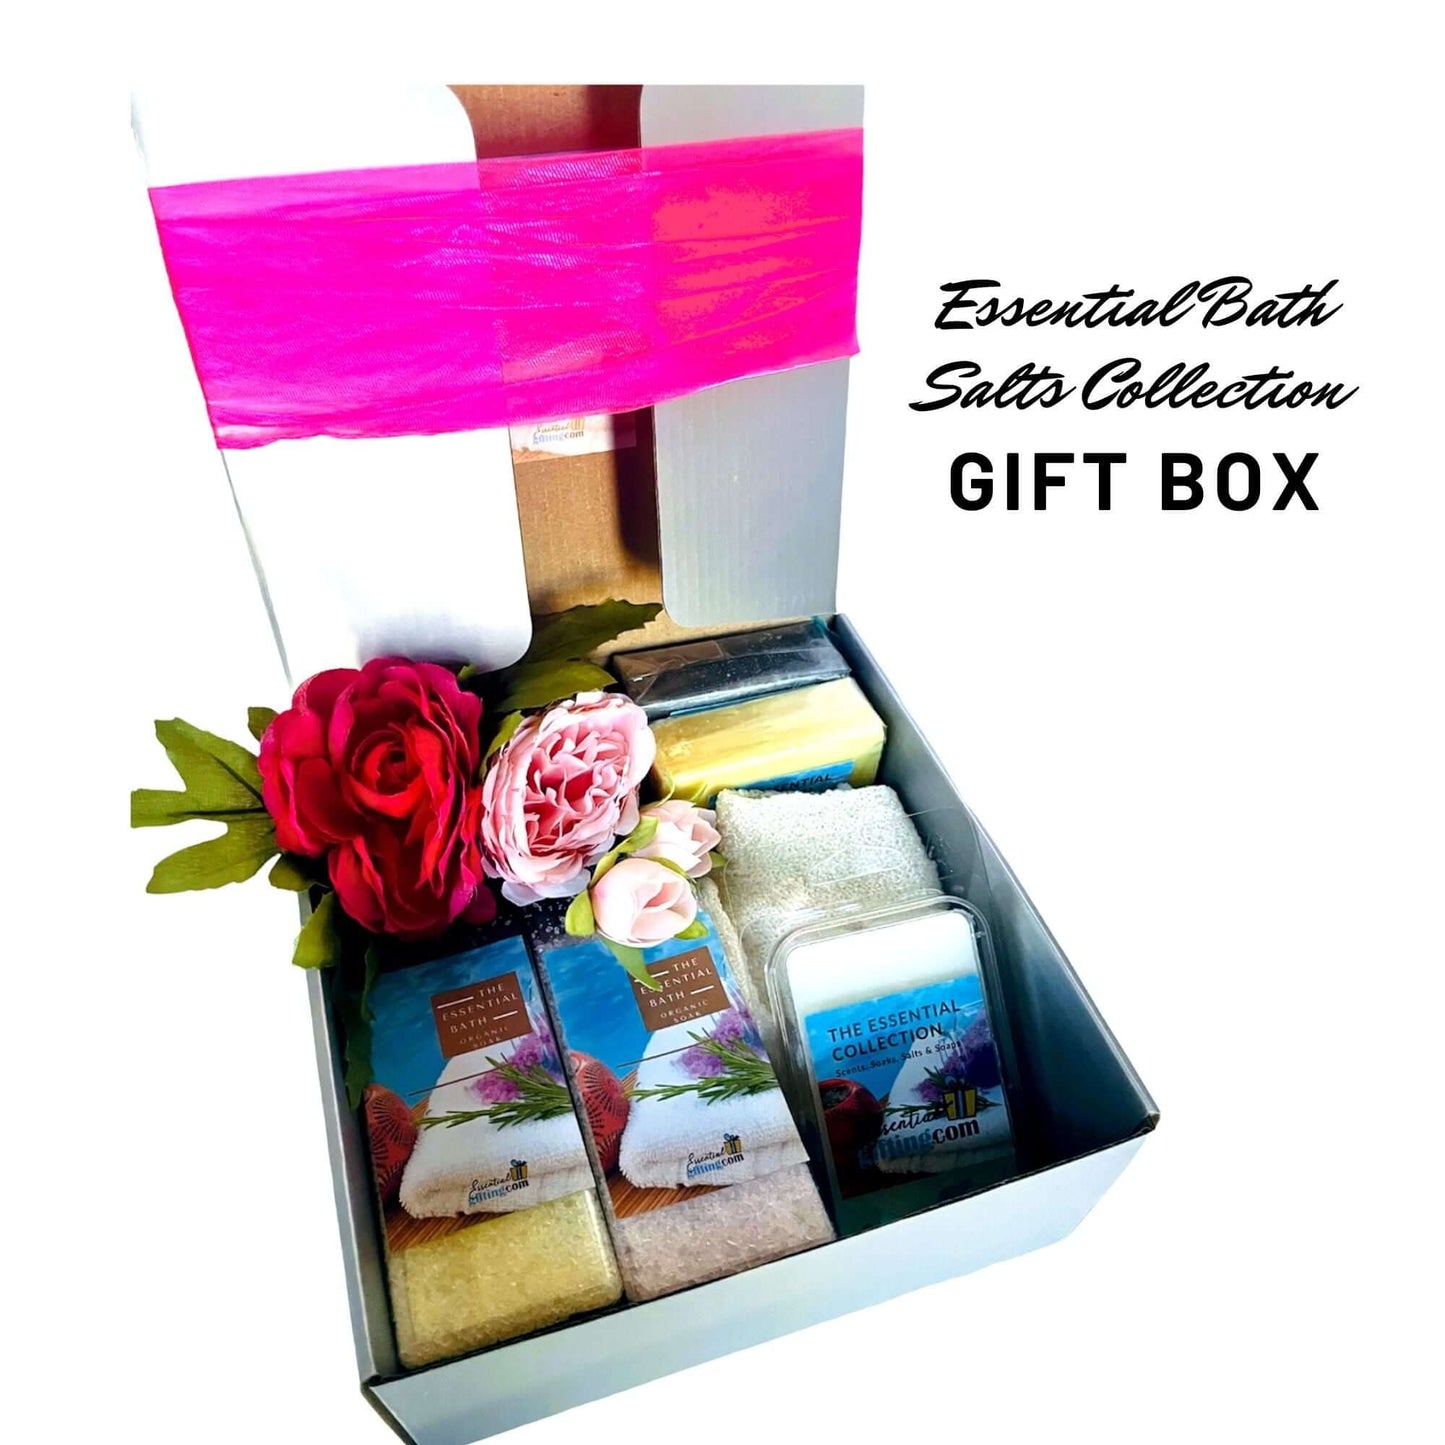 Luxurious bath salts and beauty essentials in a delightful gift box, adorned with vibrant flowers for a spa-like experience.